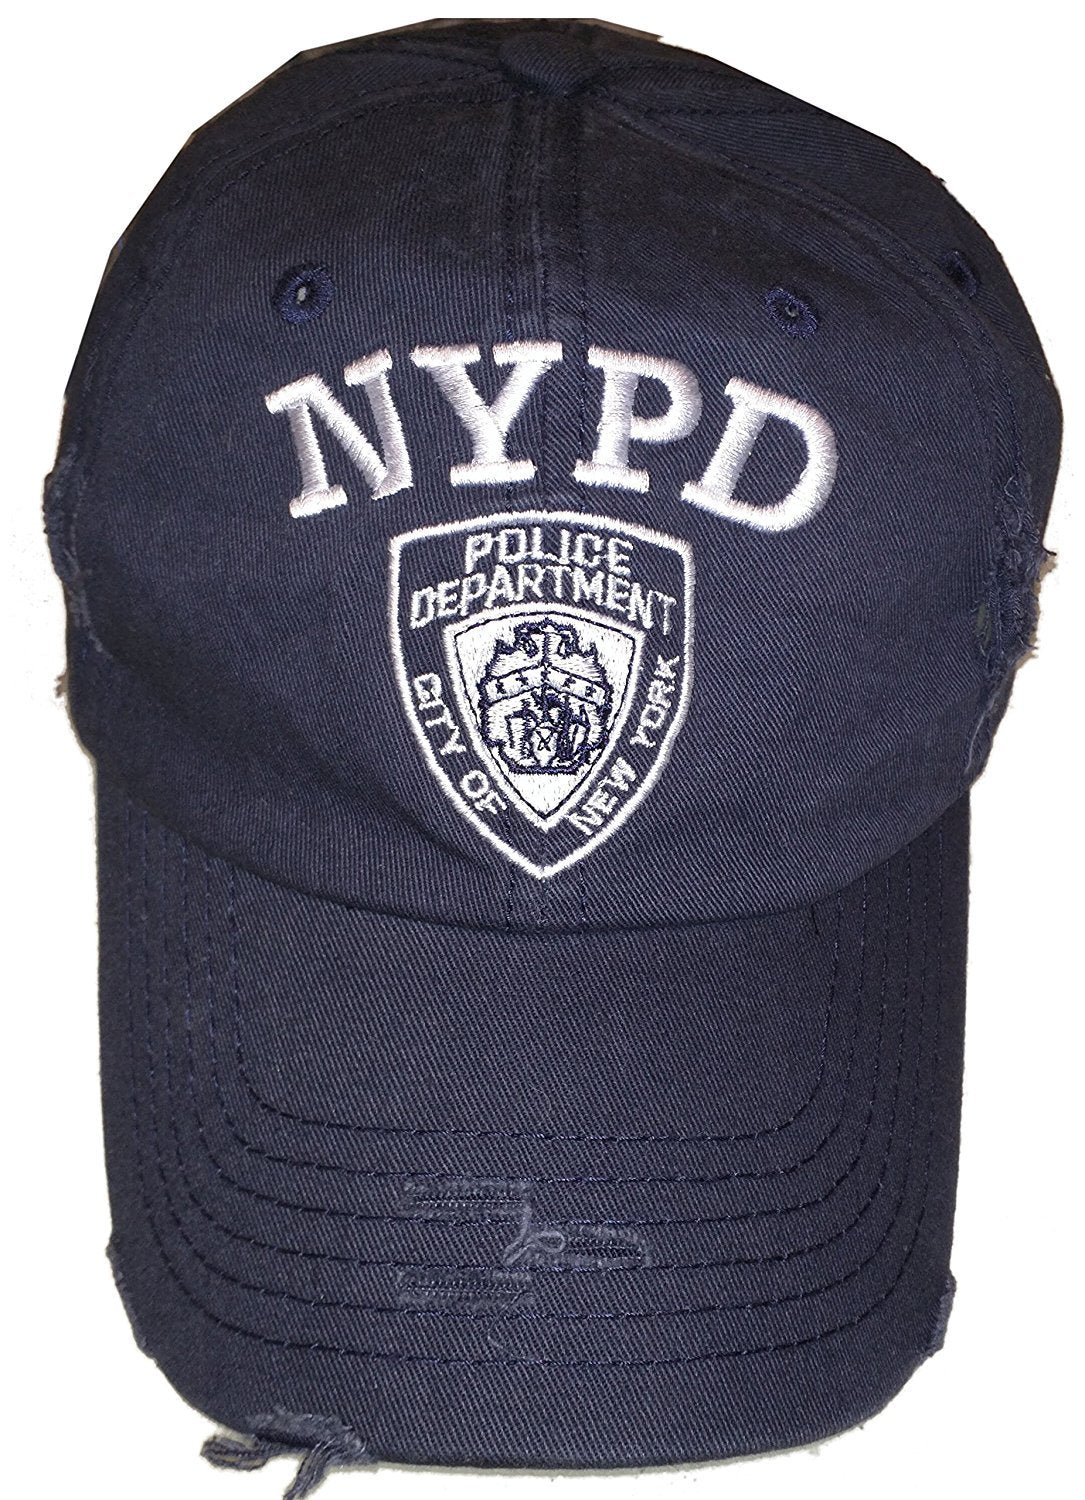 NYPD Baseball Hat New York Police Department Distressed White Logo Navy Blue